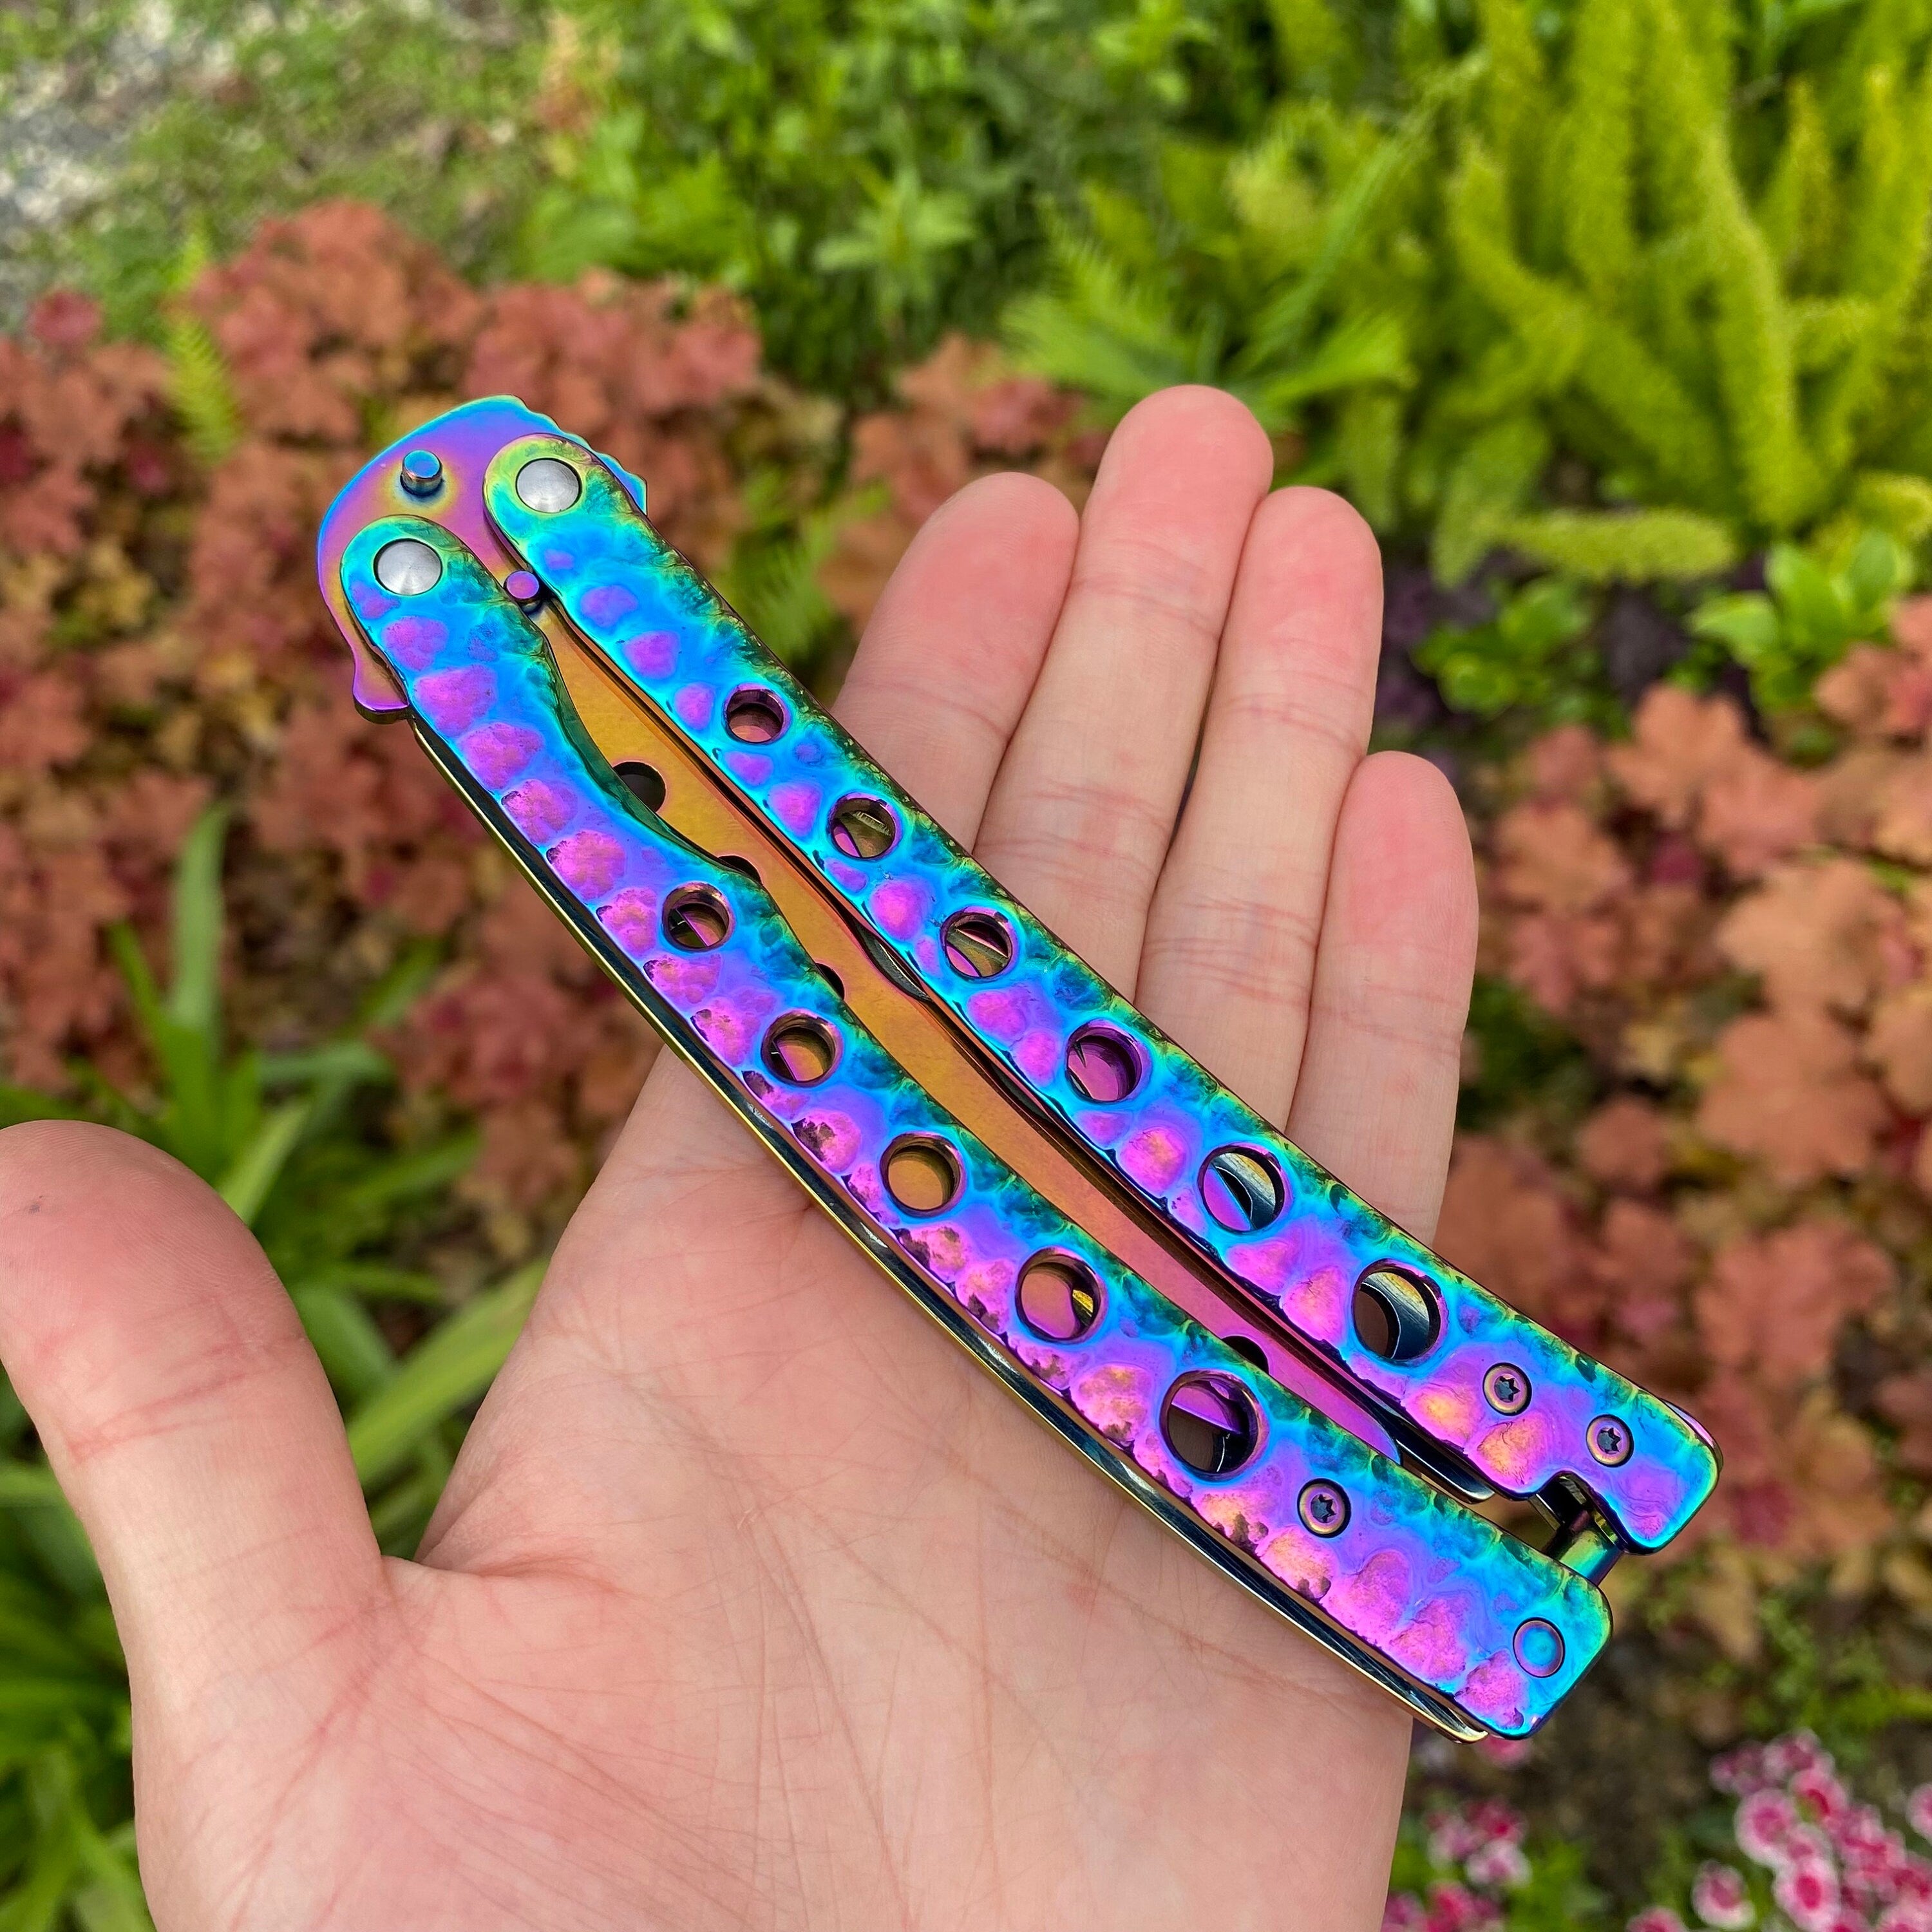 Rainbow Color Butterfly Knif